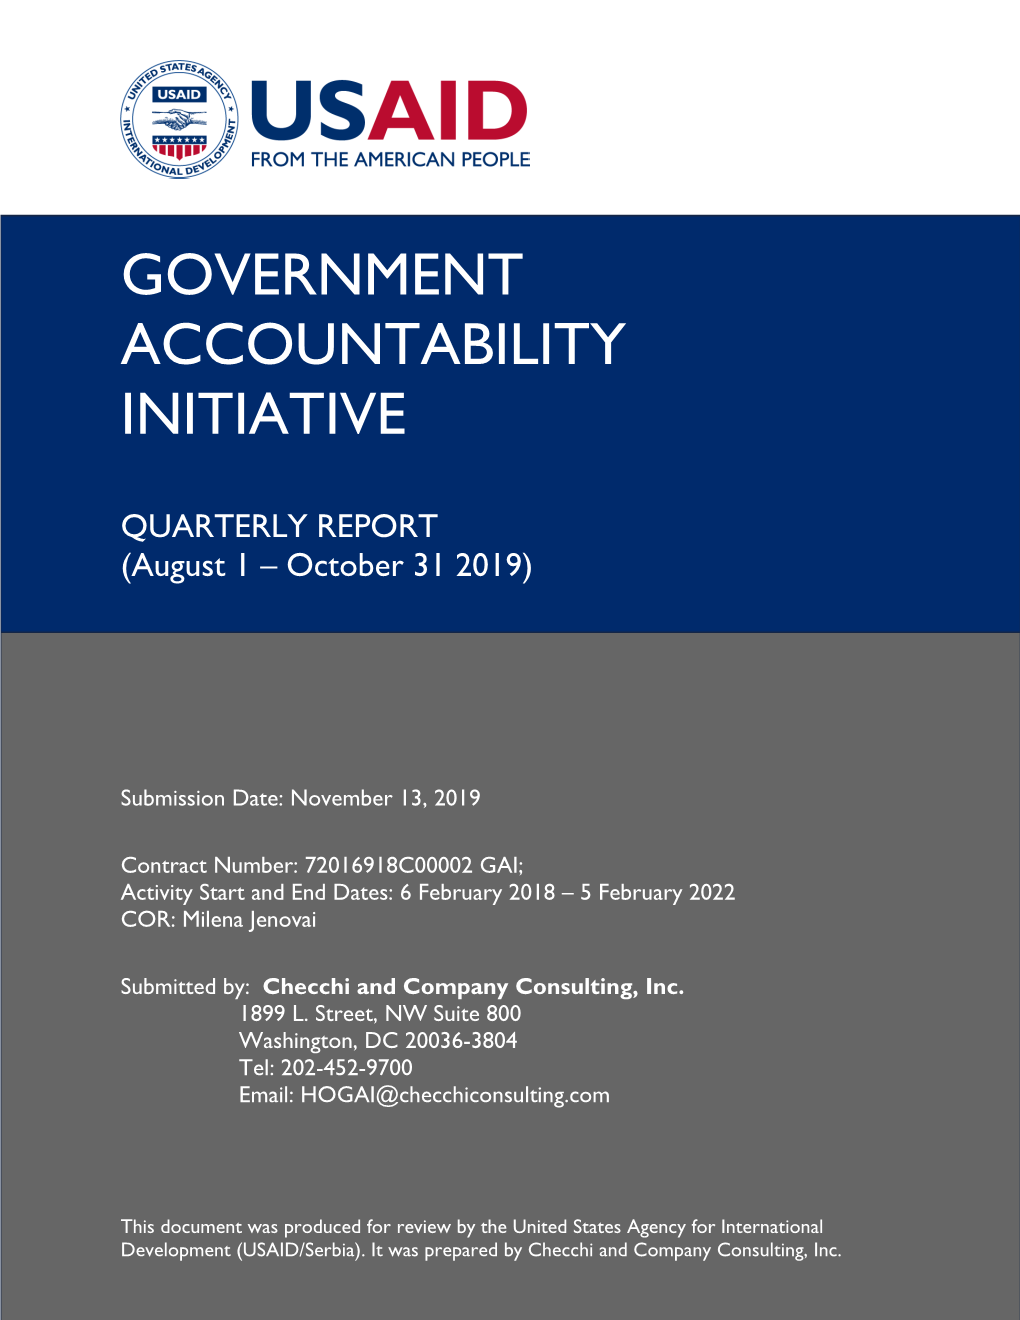 GOVERNMENT ACCOUNTABILITY INITIATIVE Contract Number 72016918C00002